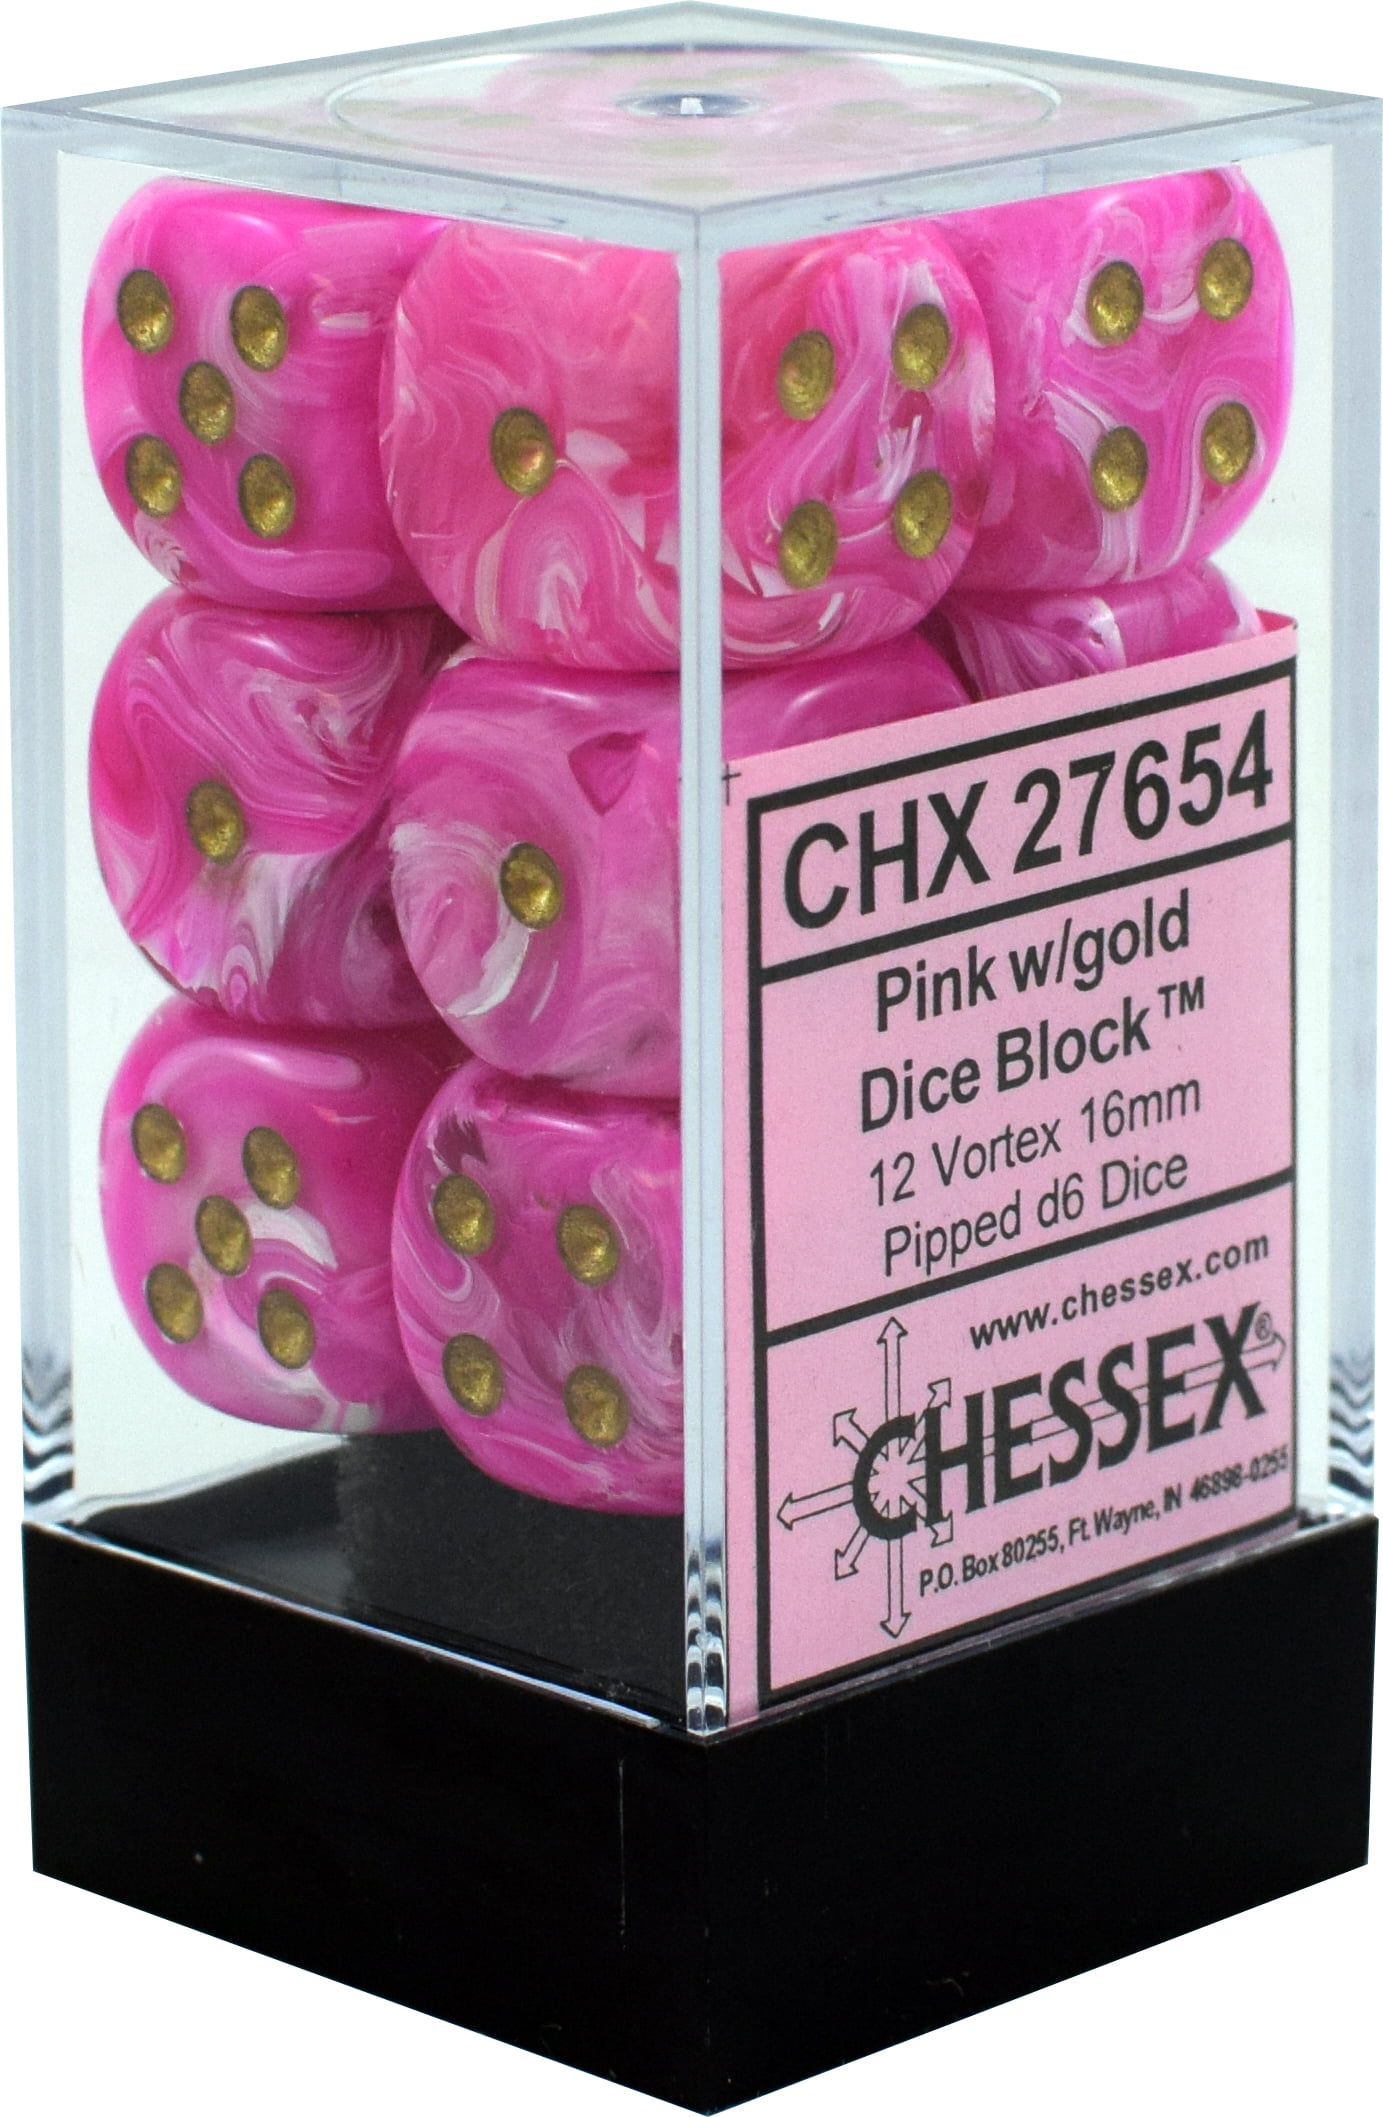 Chessex 27654 Vortex Pink with Gold 16mm Dice Block 12 Dice Game Accessories 